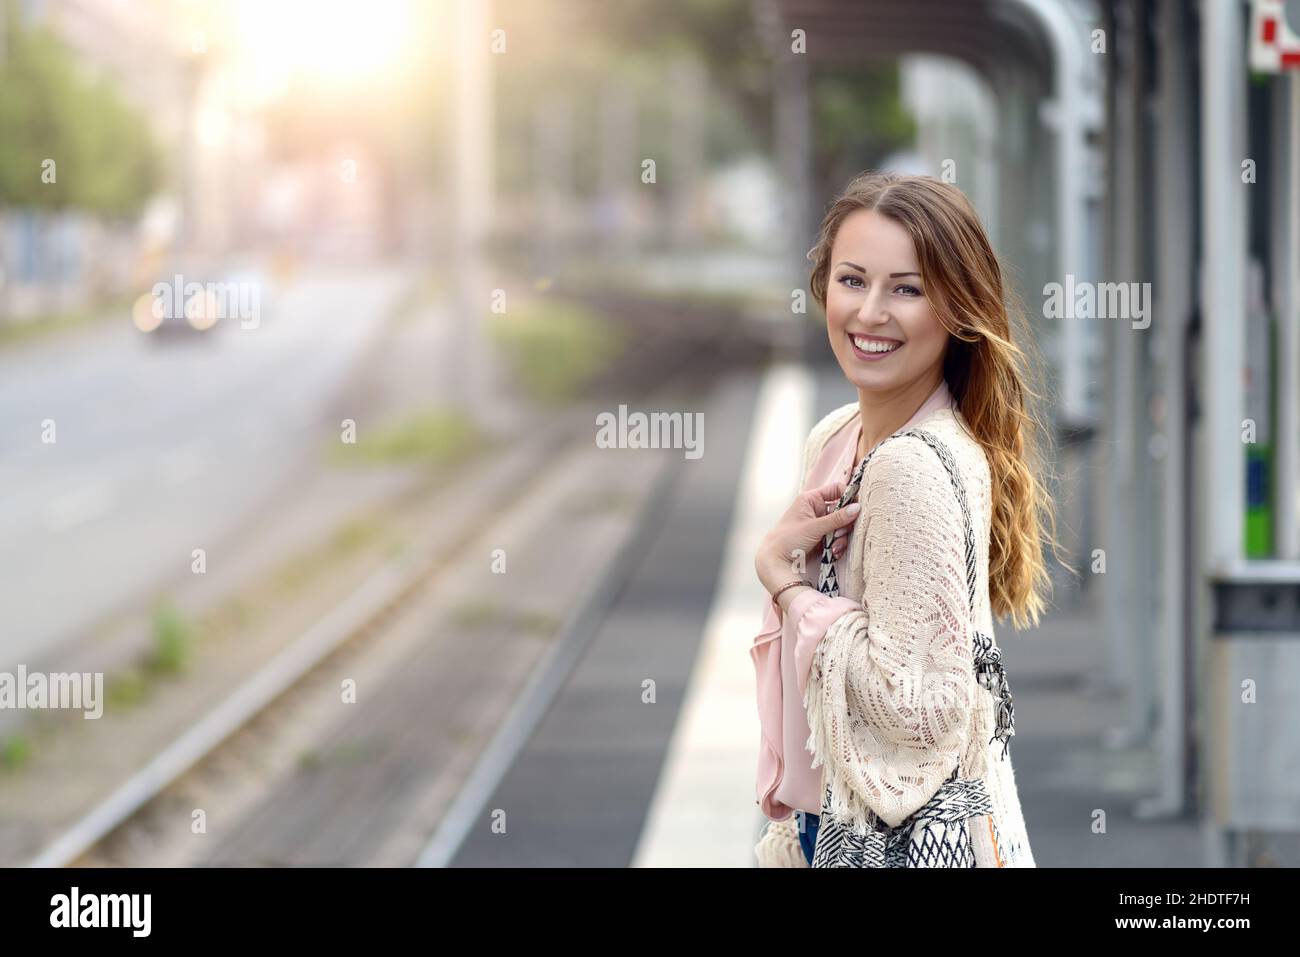 young woman, woman, laughing, bus stop, commuter, girl, girls, young women, female, ladies, lady, women, laugh, smiling, bus station, bus stops, stop, Stock Photo